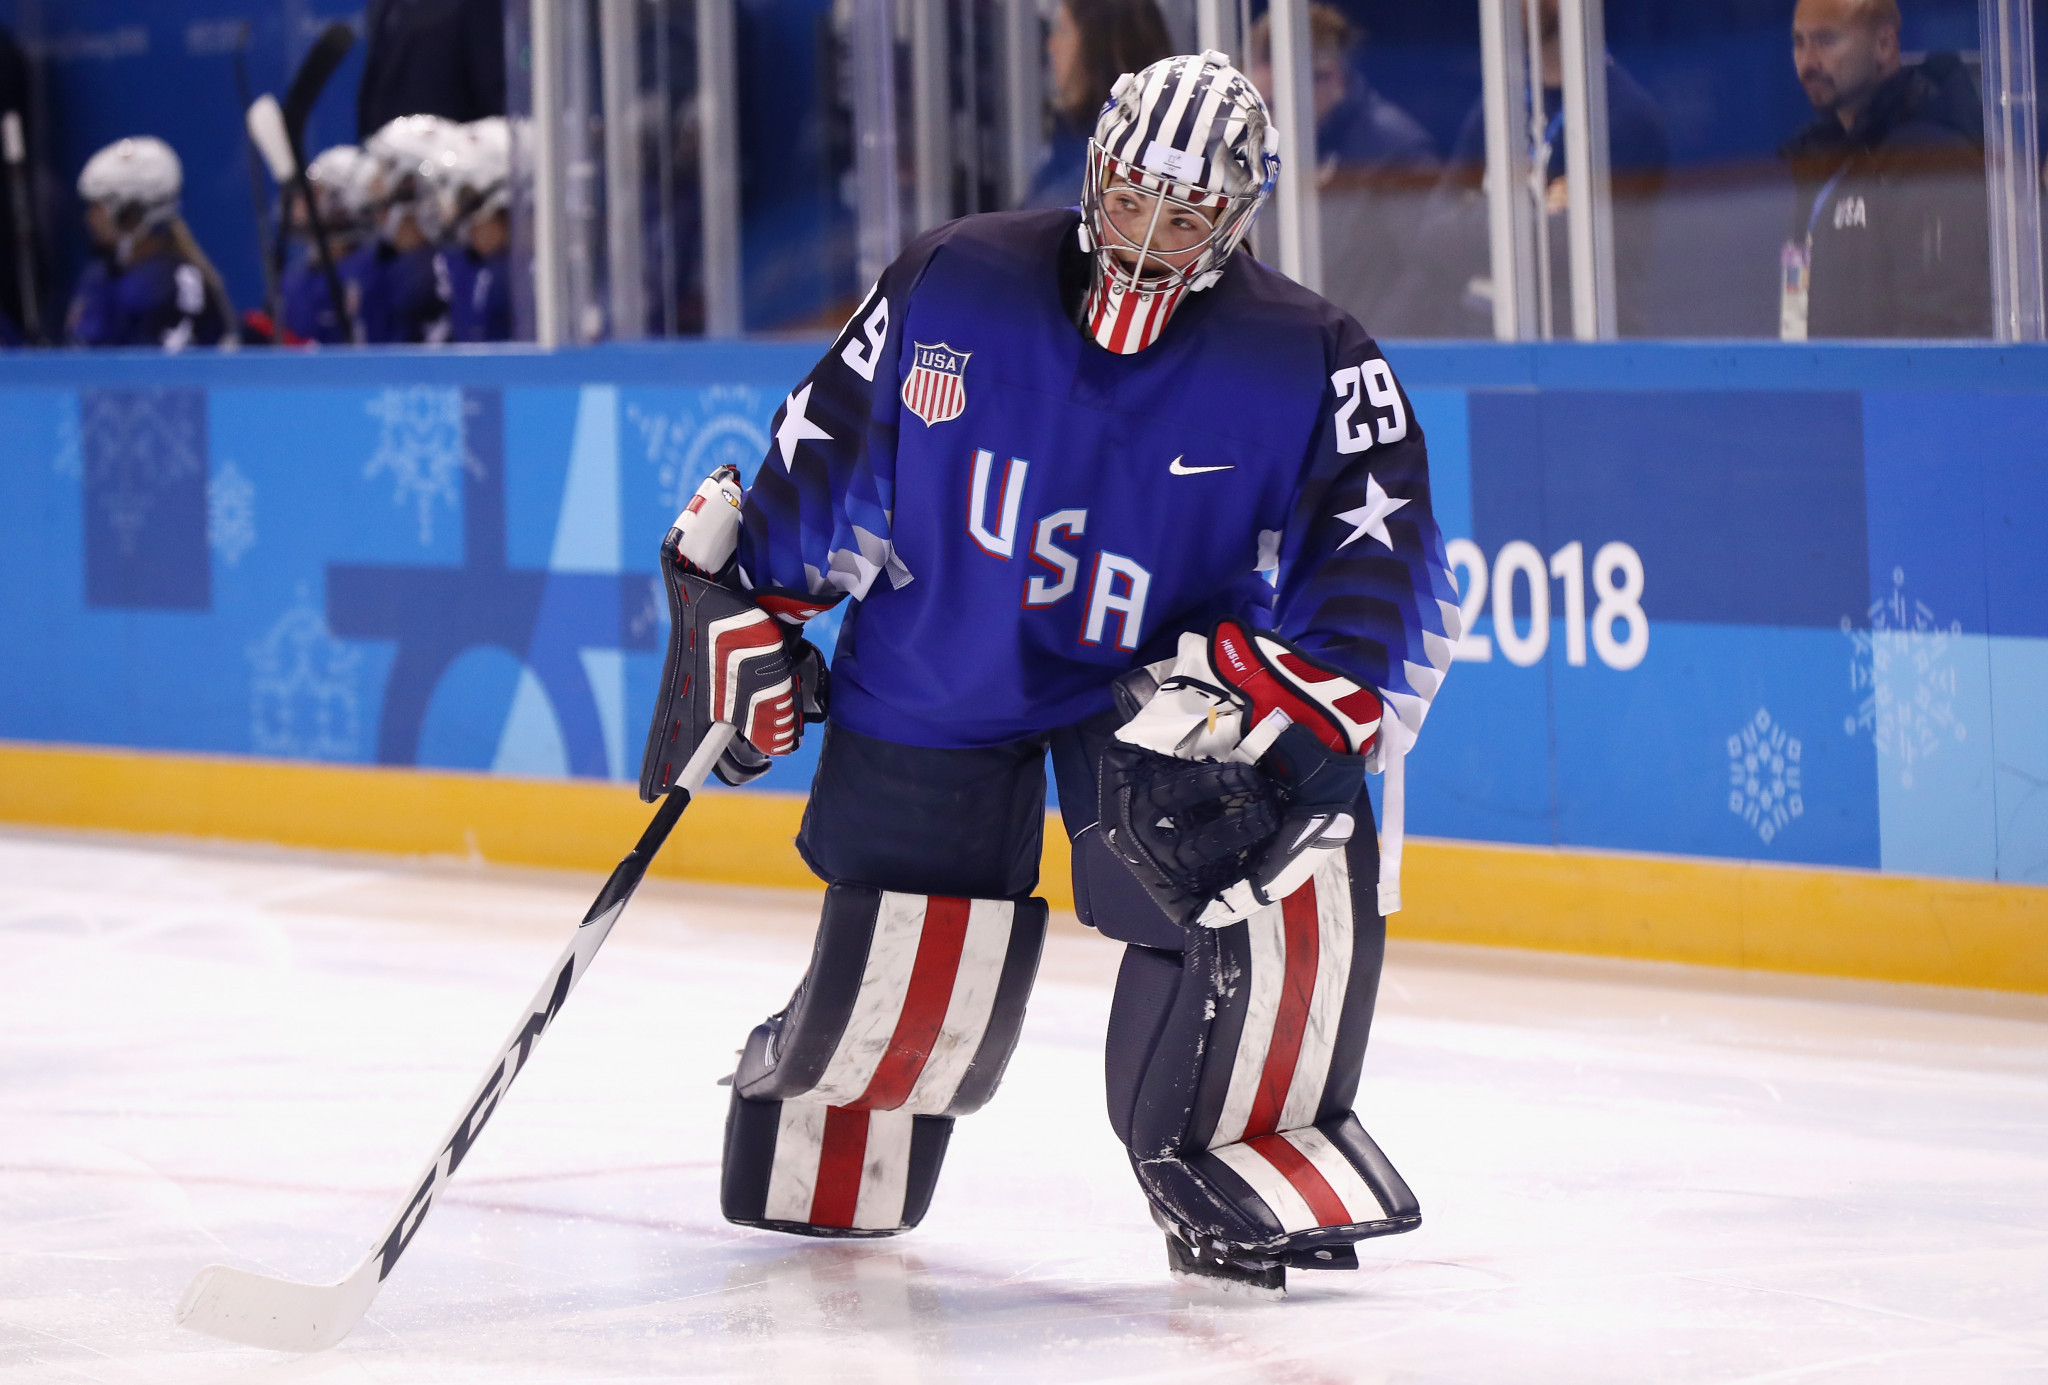 American goaltender Nicole Hensley started the match against the OAR team today at Pyeongchang 2018 and was allowed to wear a helmet with the Statue of Liberty on it ©Getty Images